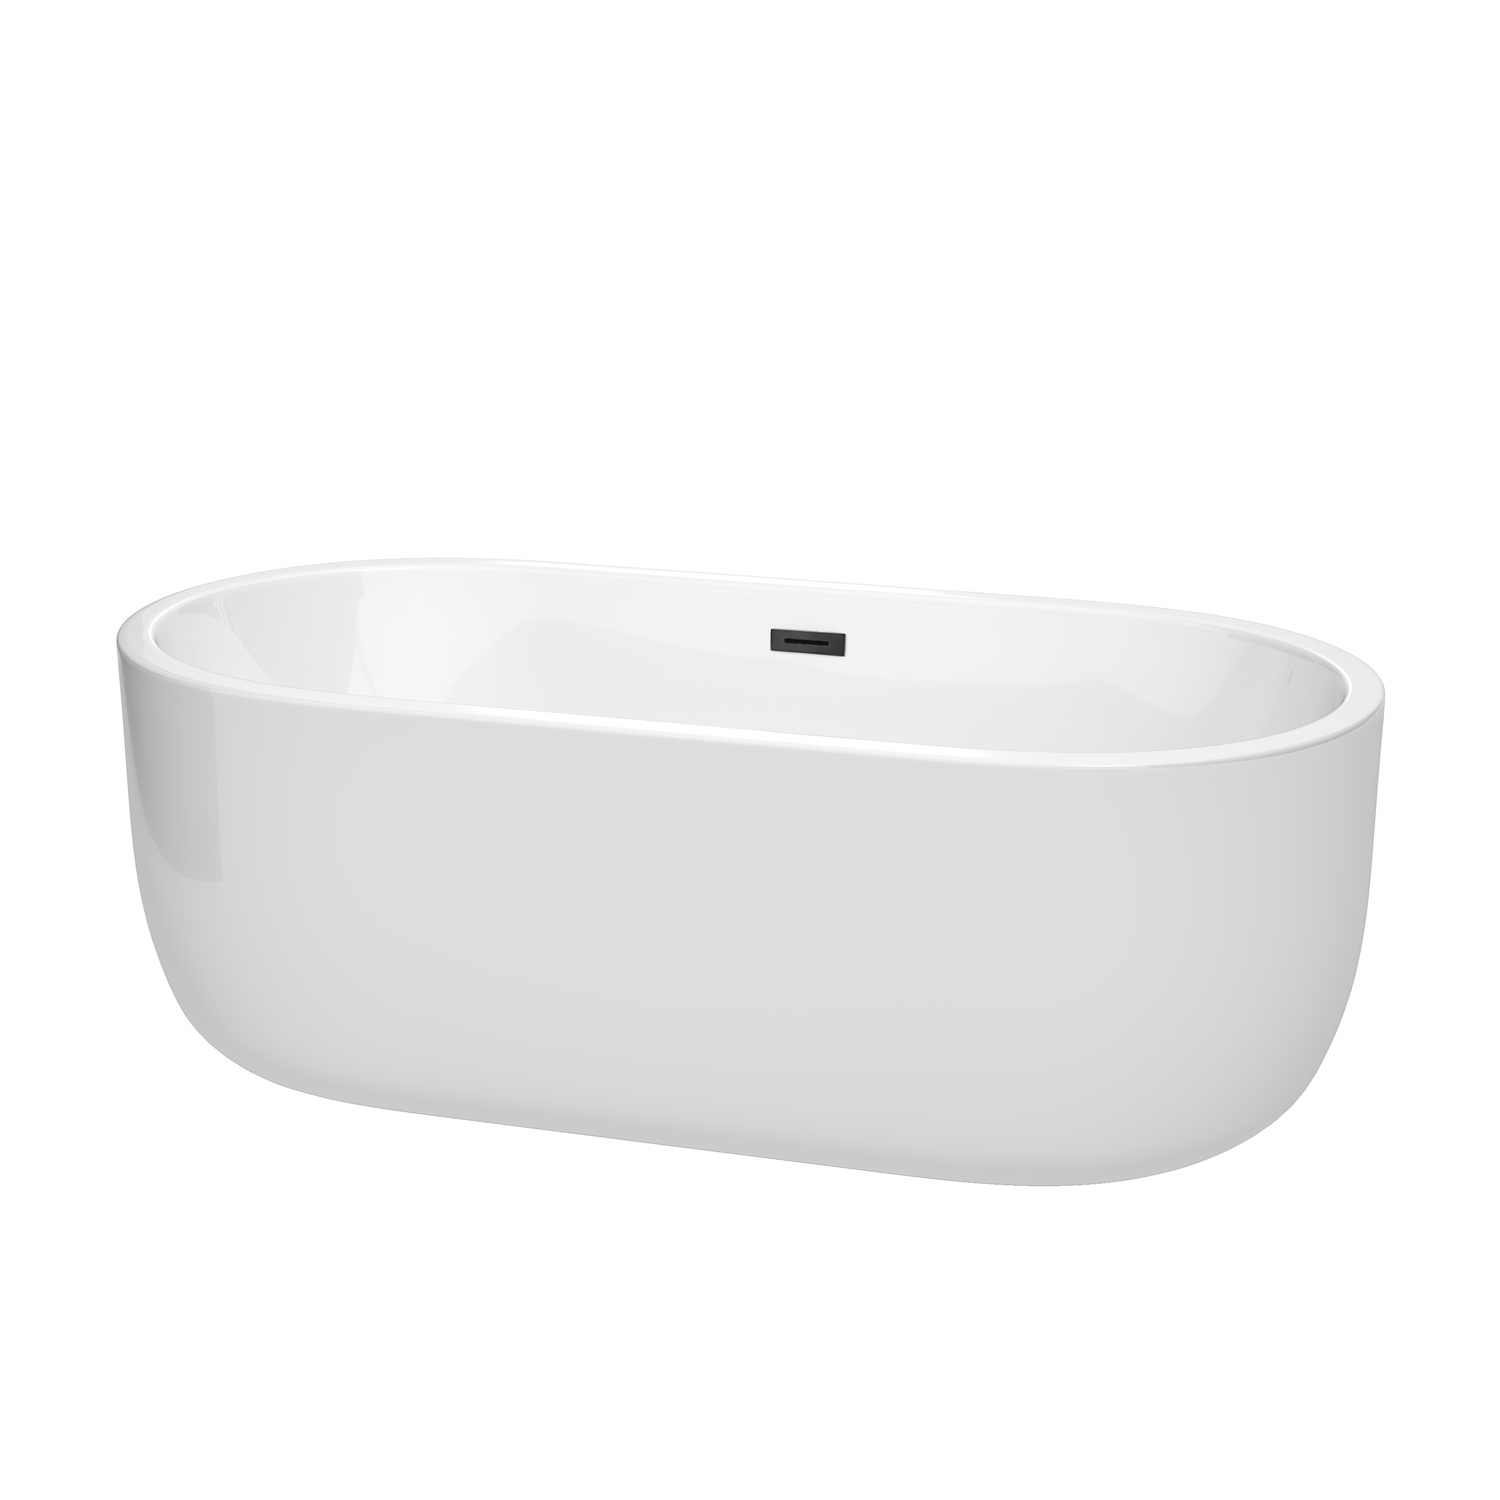 67" Freestanding Bathtub in White with Matte Black Drain Color and Overflow Trim